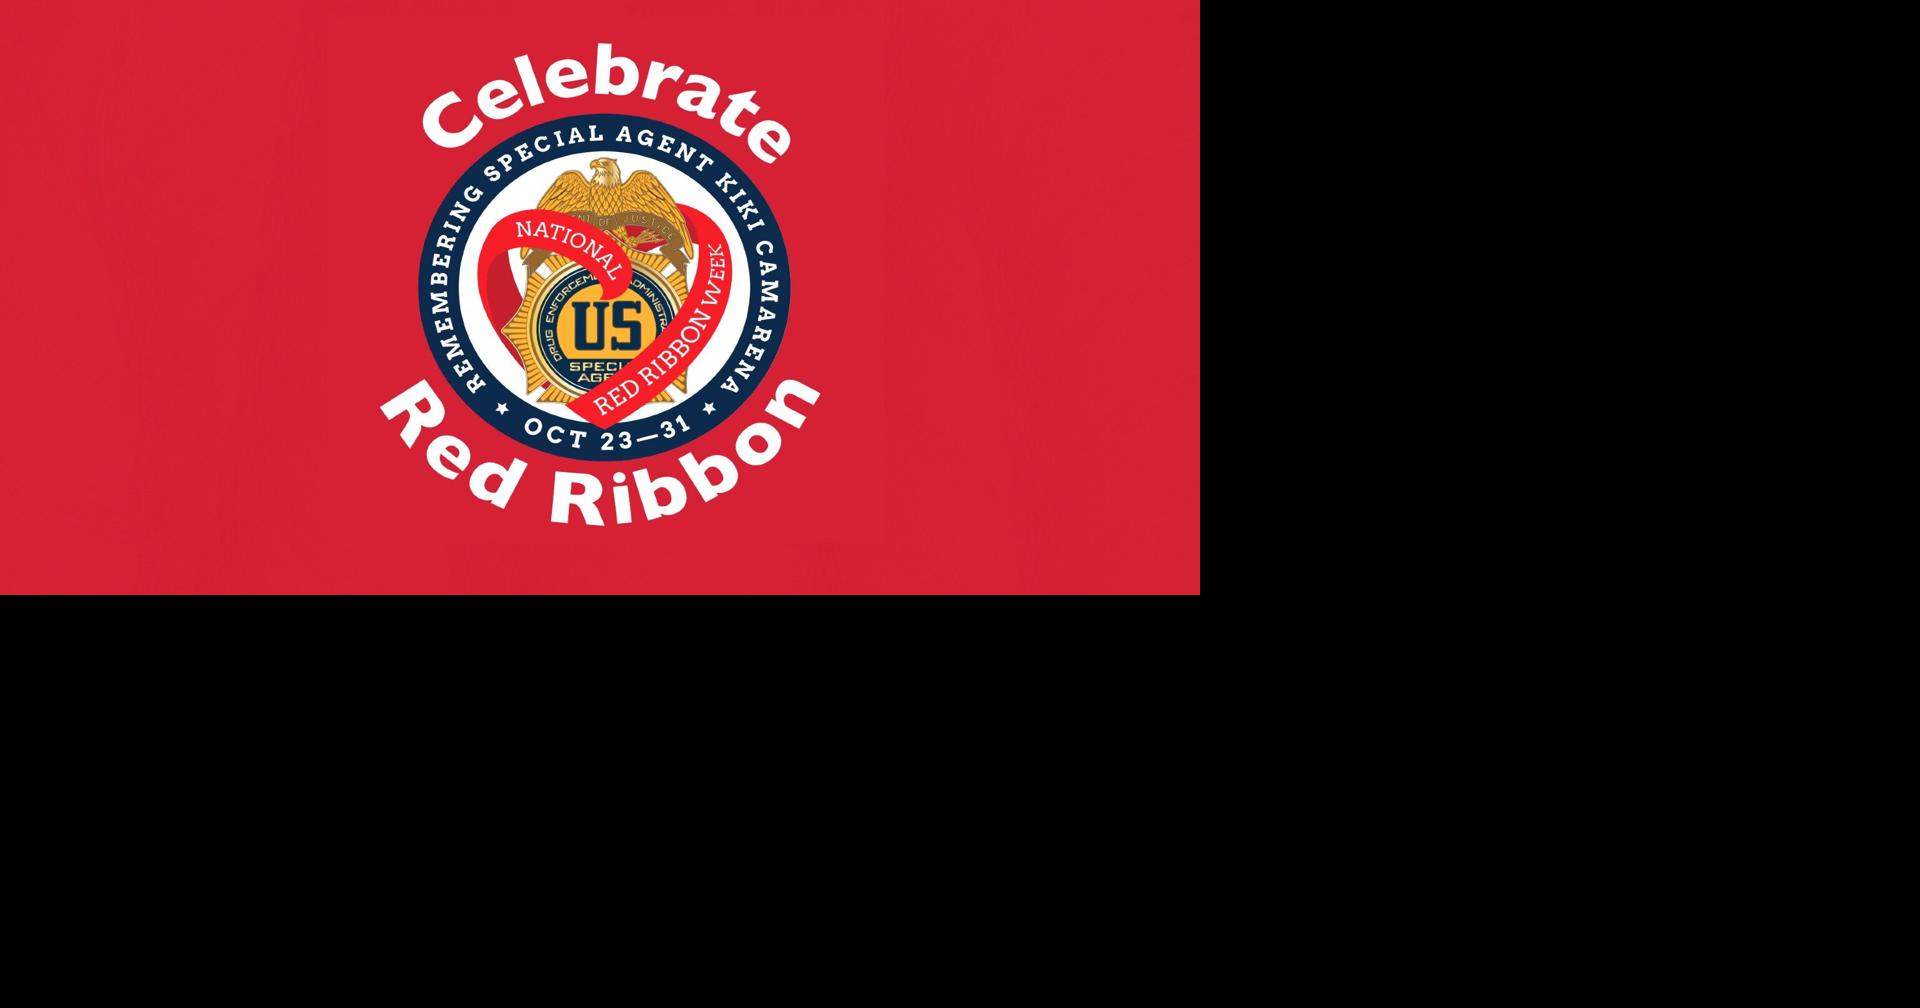 City of Las Vegas on X: Tonight, the Gateway Arches will be red in honor  of #RedRibbonWeek, the nation's oldest and largest drug use prevention  campaign. Our @lasvegasfd EMS teams respond to